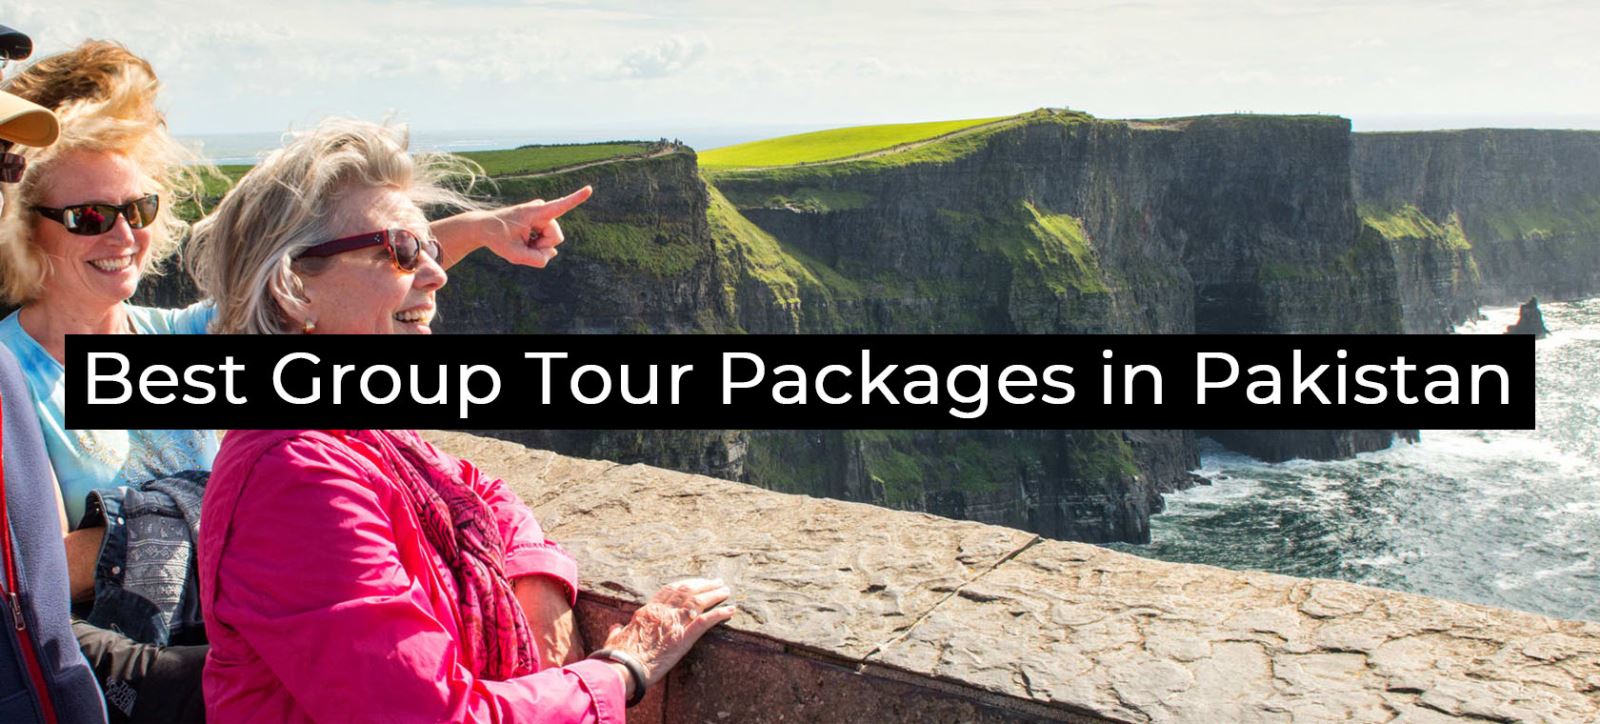 Best Group Tour Packages in Pakistan